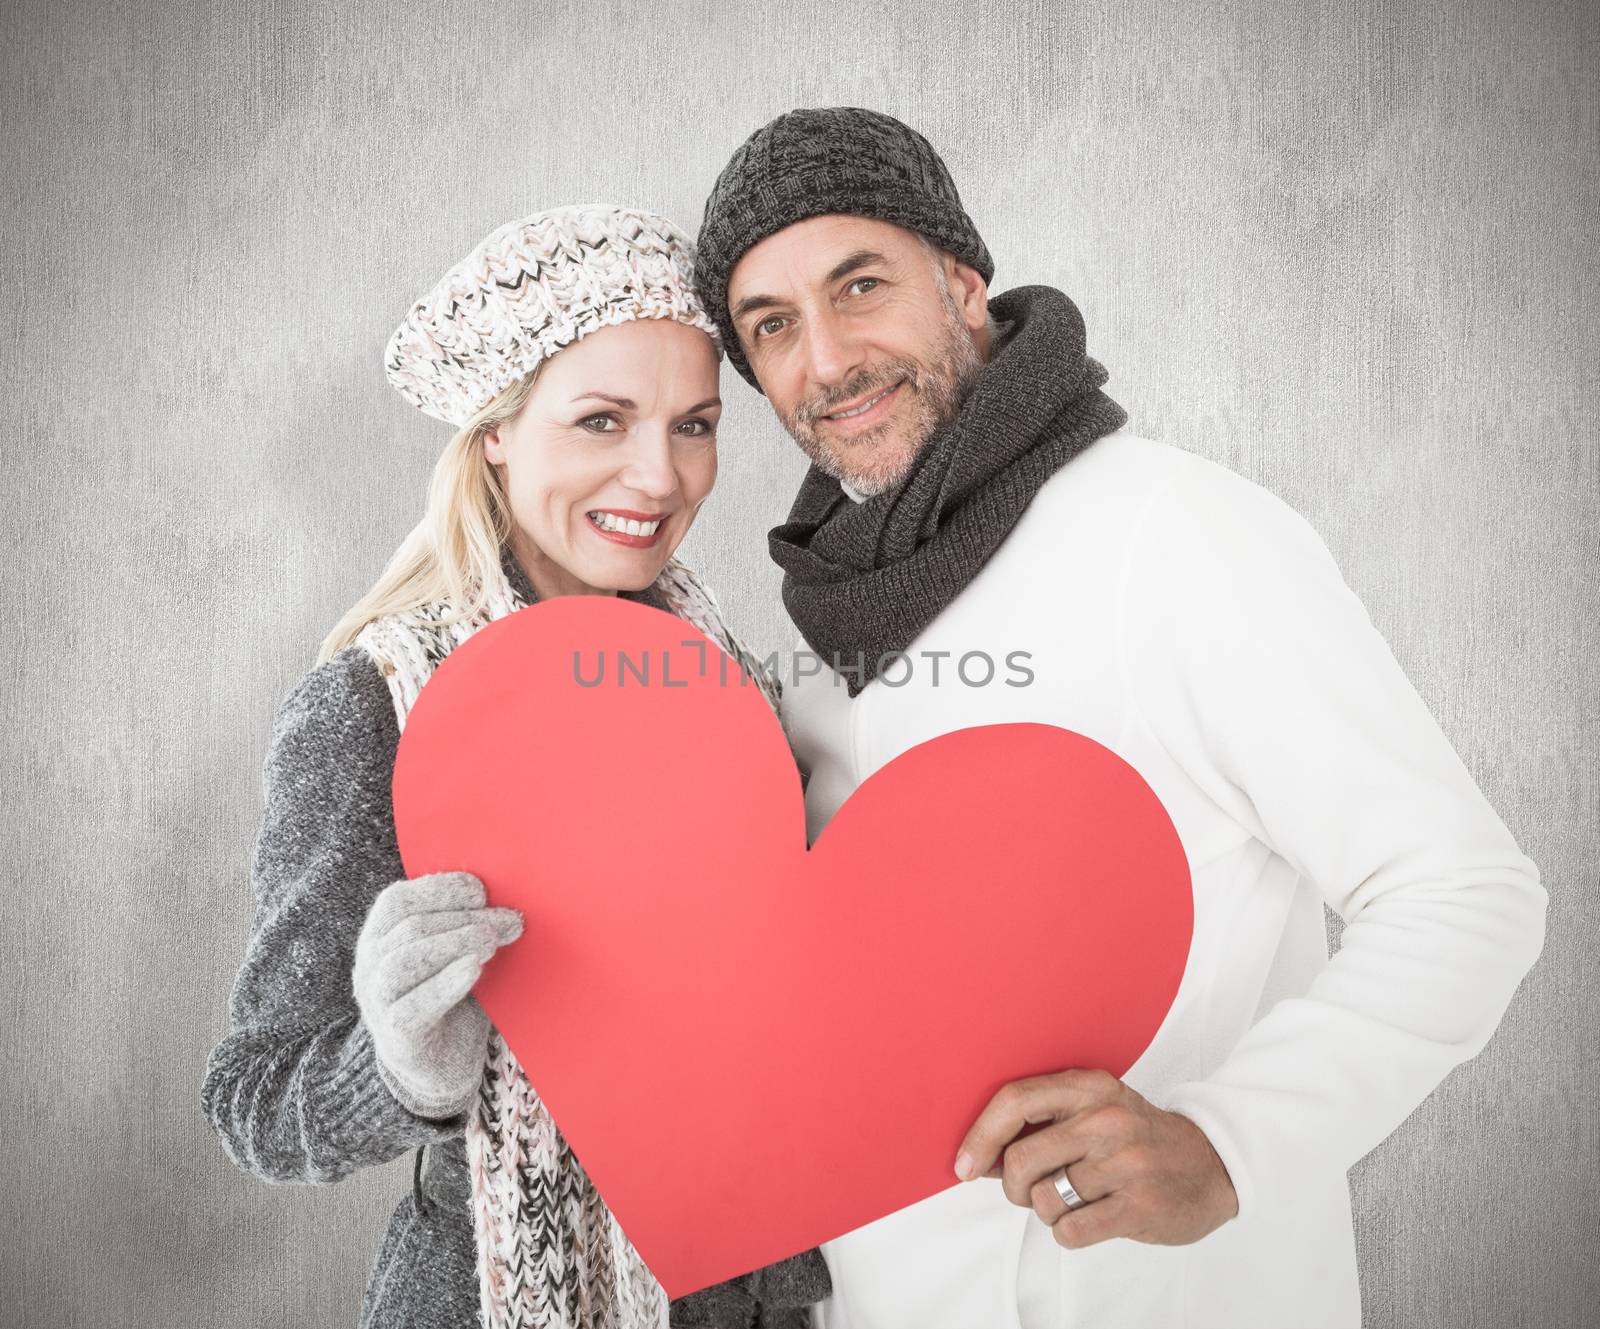 Smiling couple in winter fashion posing with heart shape against weathered surface 